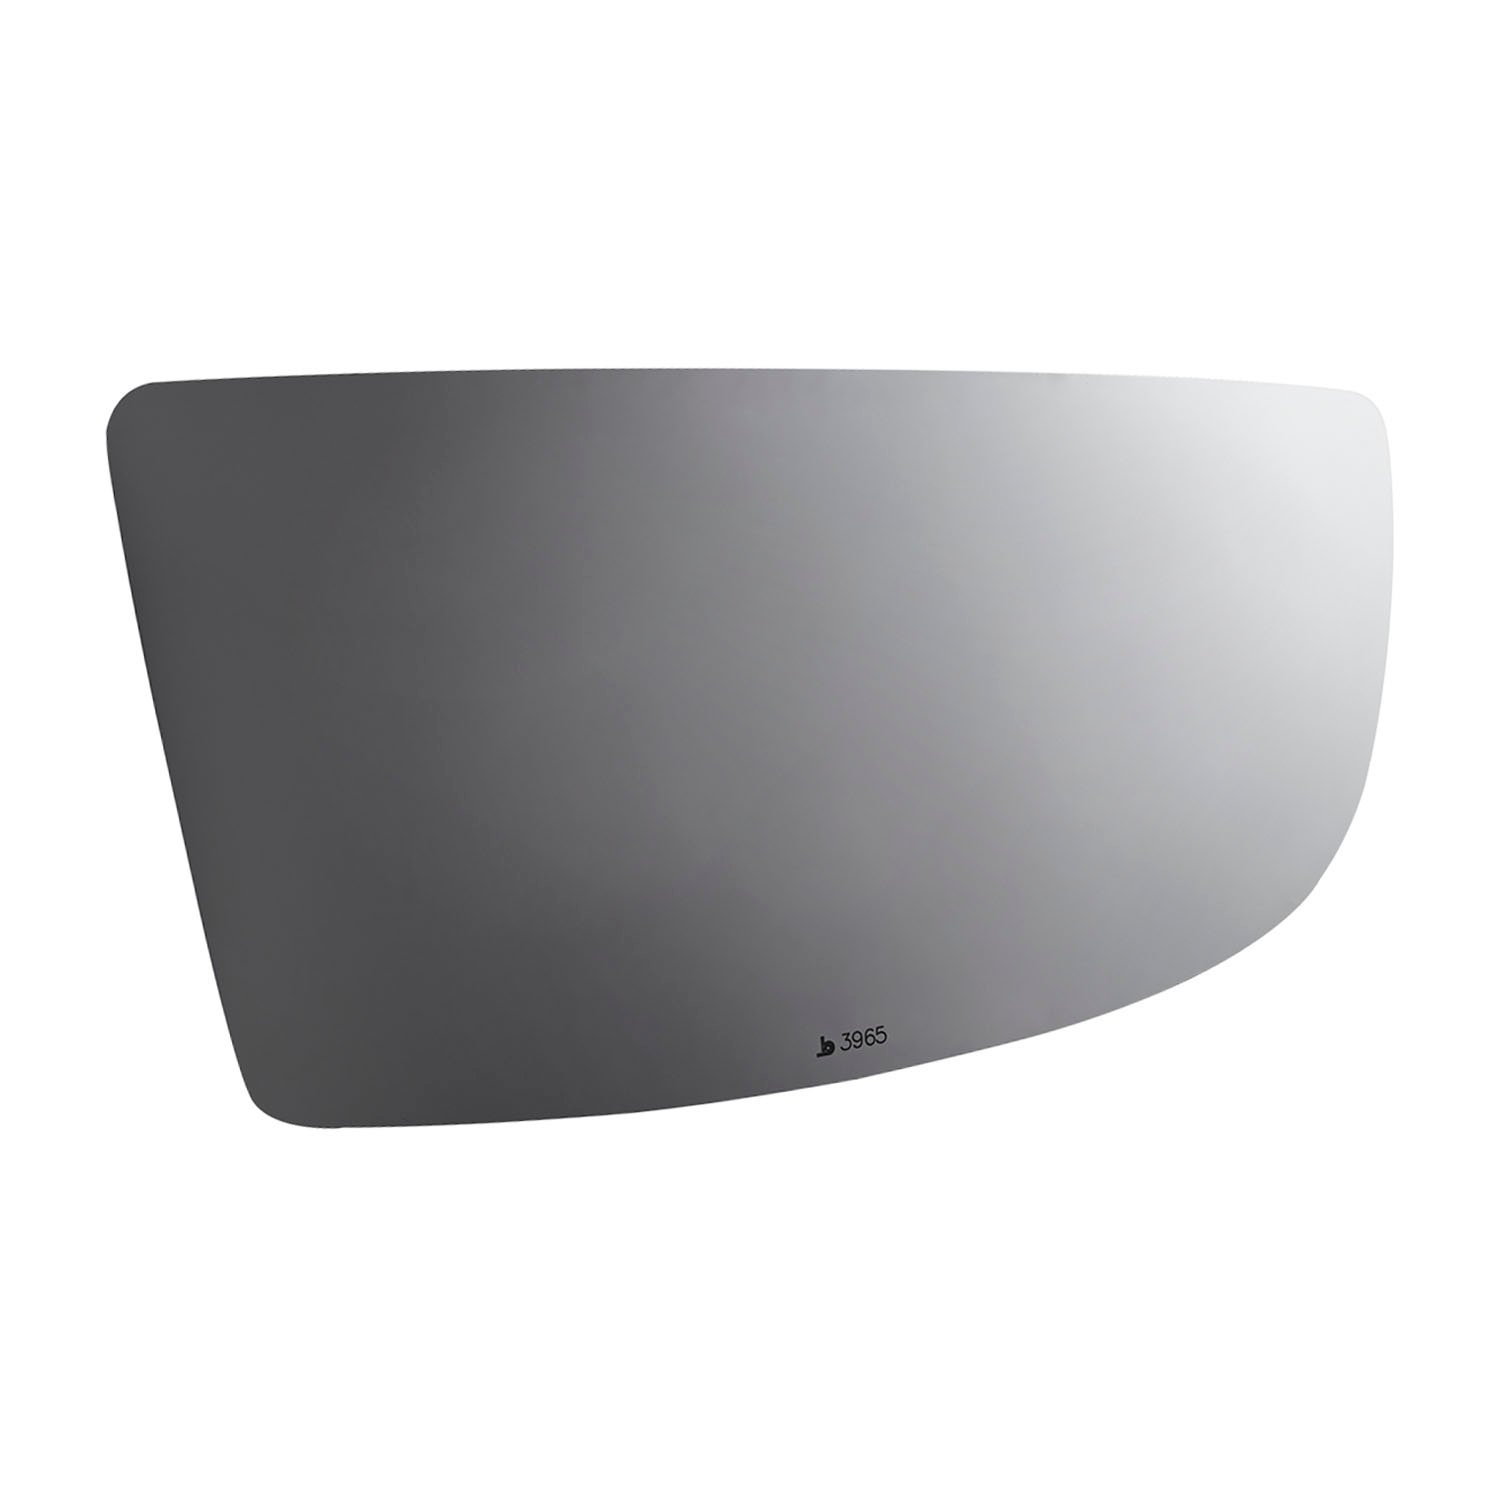 3965 SIDE VIEW MIRROR